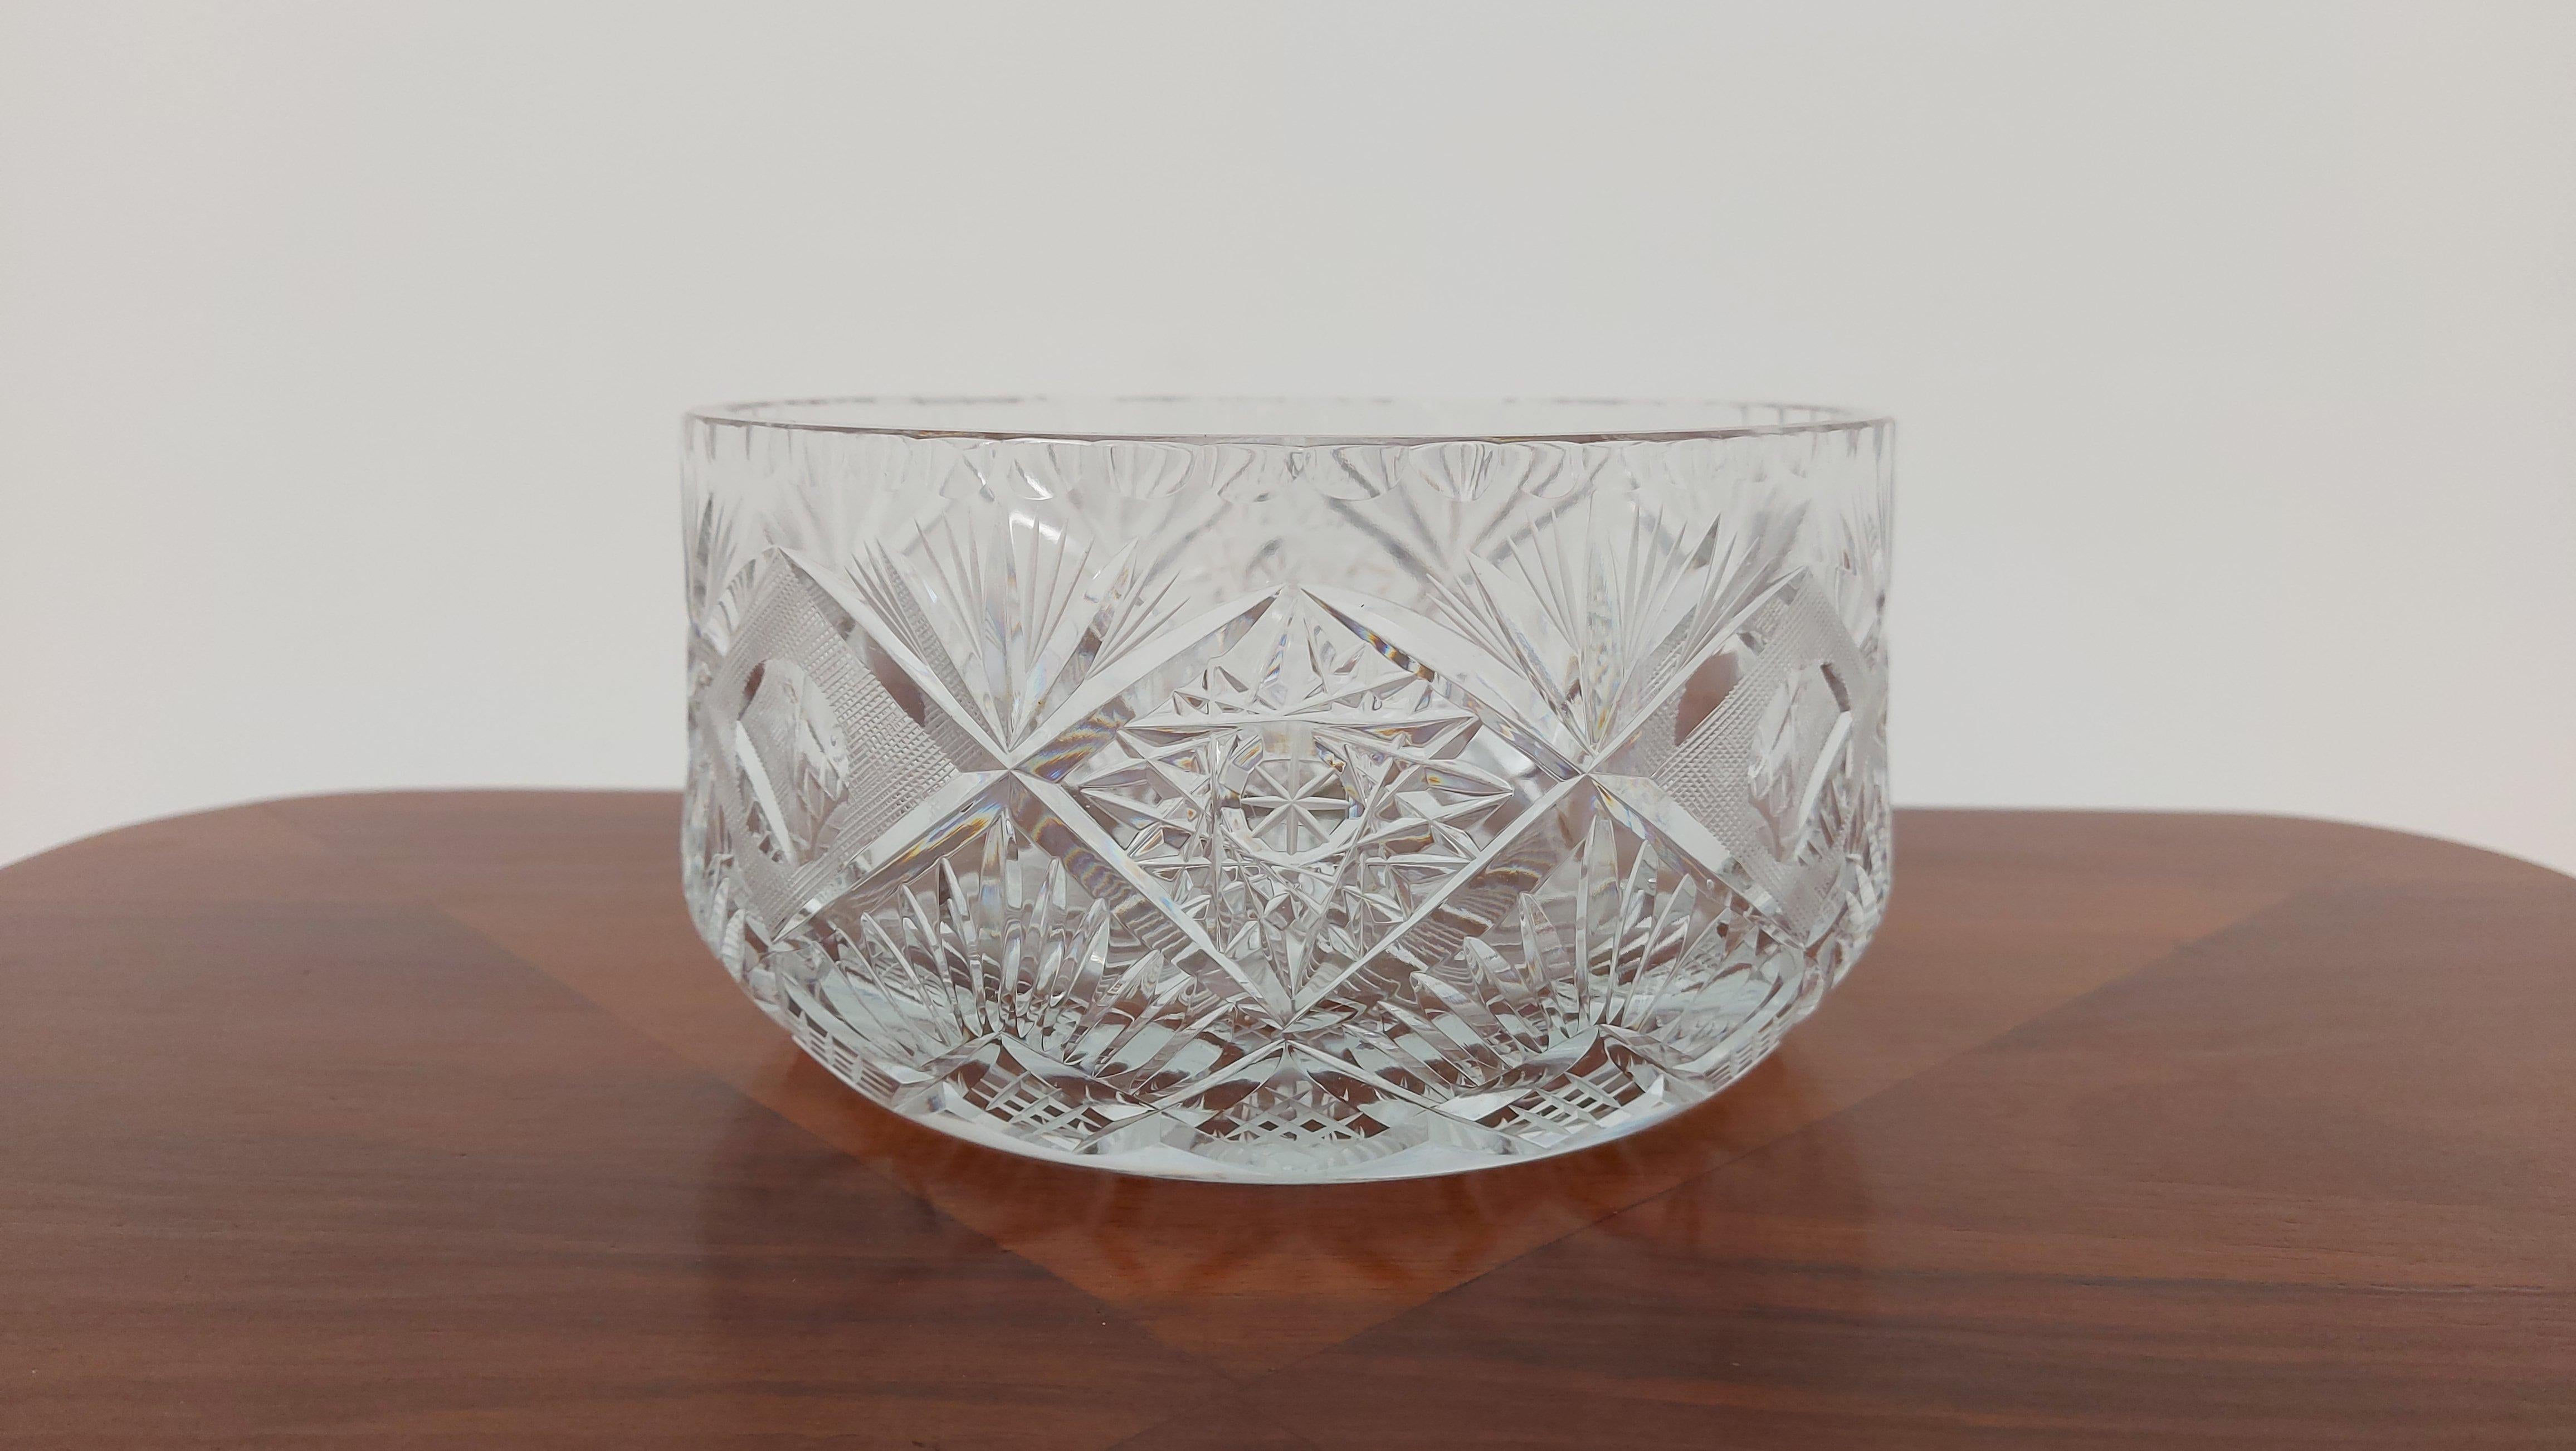 Crystal bowl for fruit or sweets.

Made in Poland in the 1950s / 1960s.

Dimensions: height 10 cm / width 20 cm.